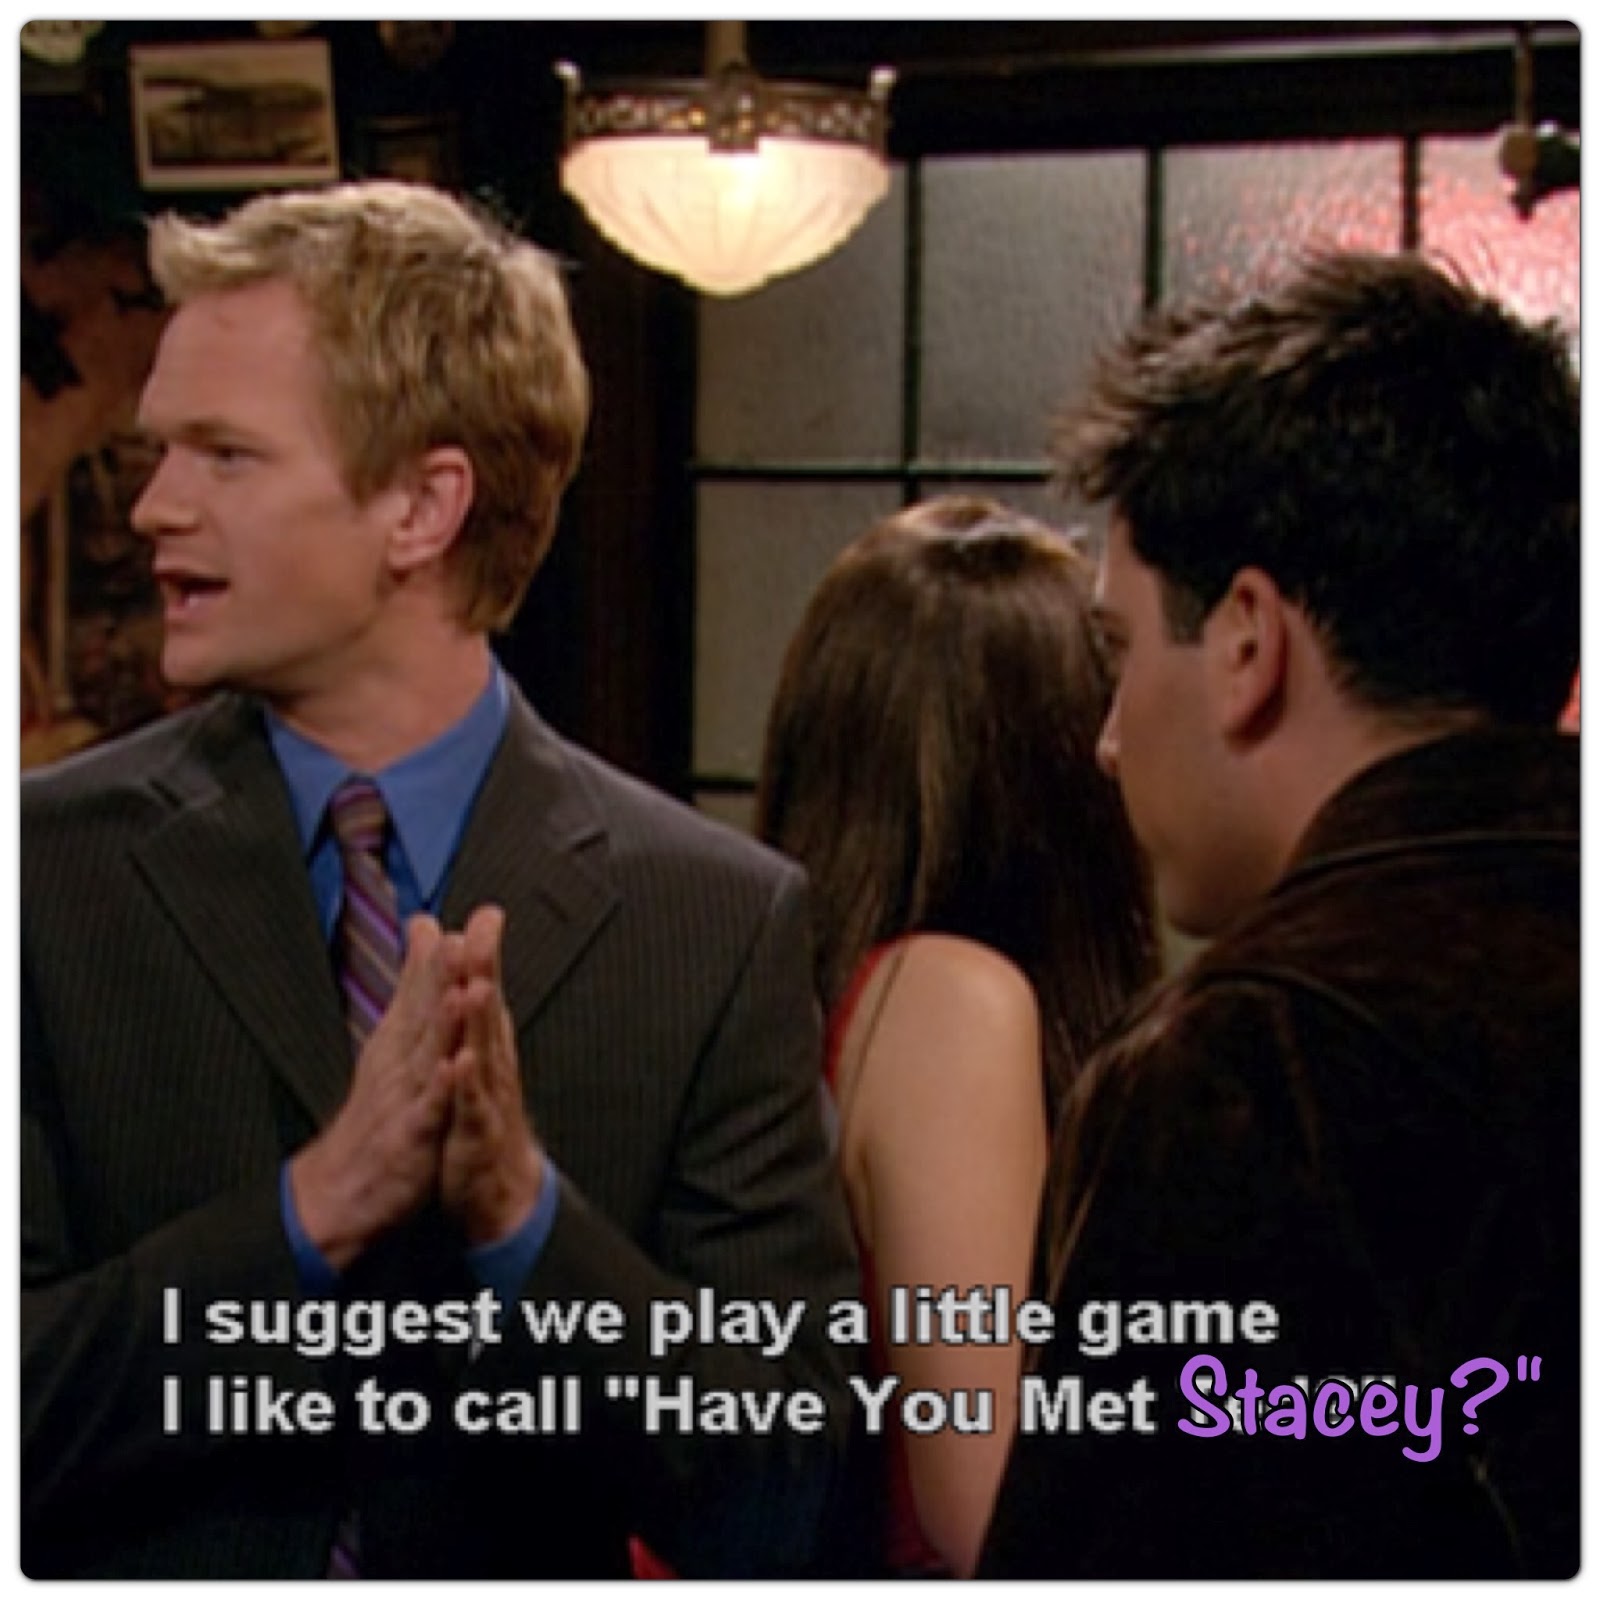 You can meet me you like. Вы знакомы с Тедом. HIMYM Barney я Слежу за тобой. Барни вы знакомы с Тедом. Have you met Ted.